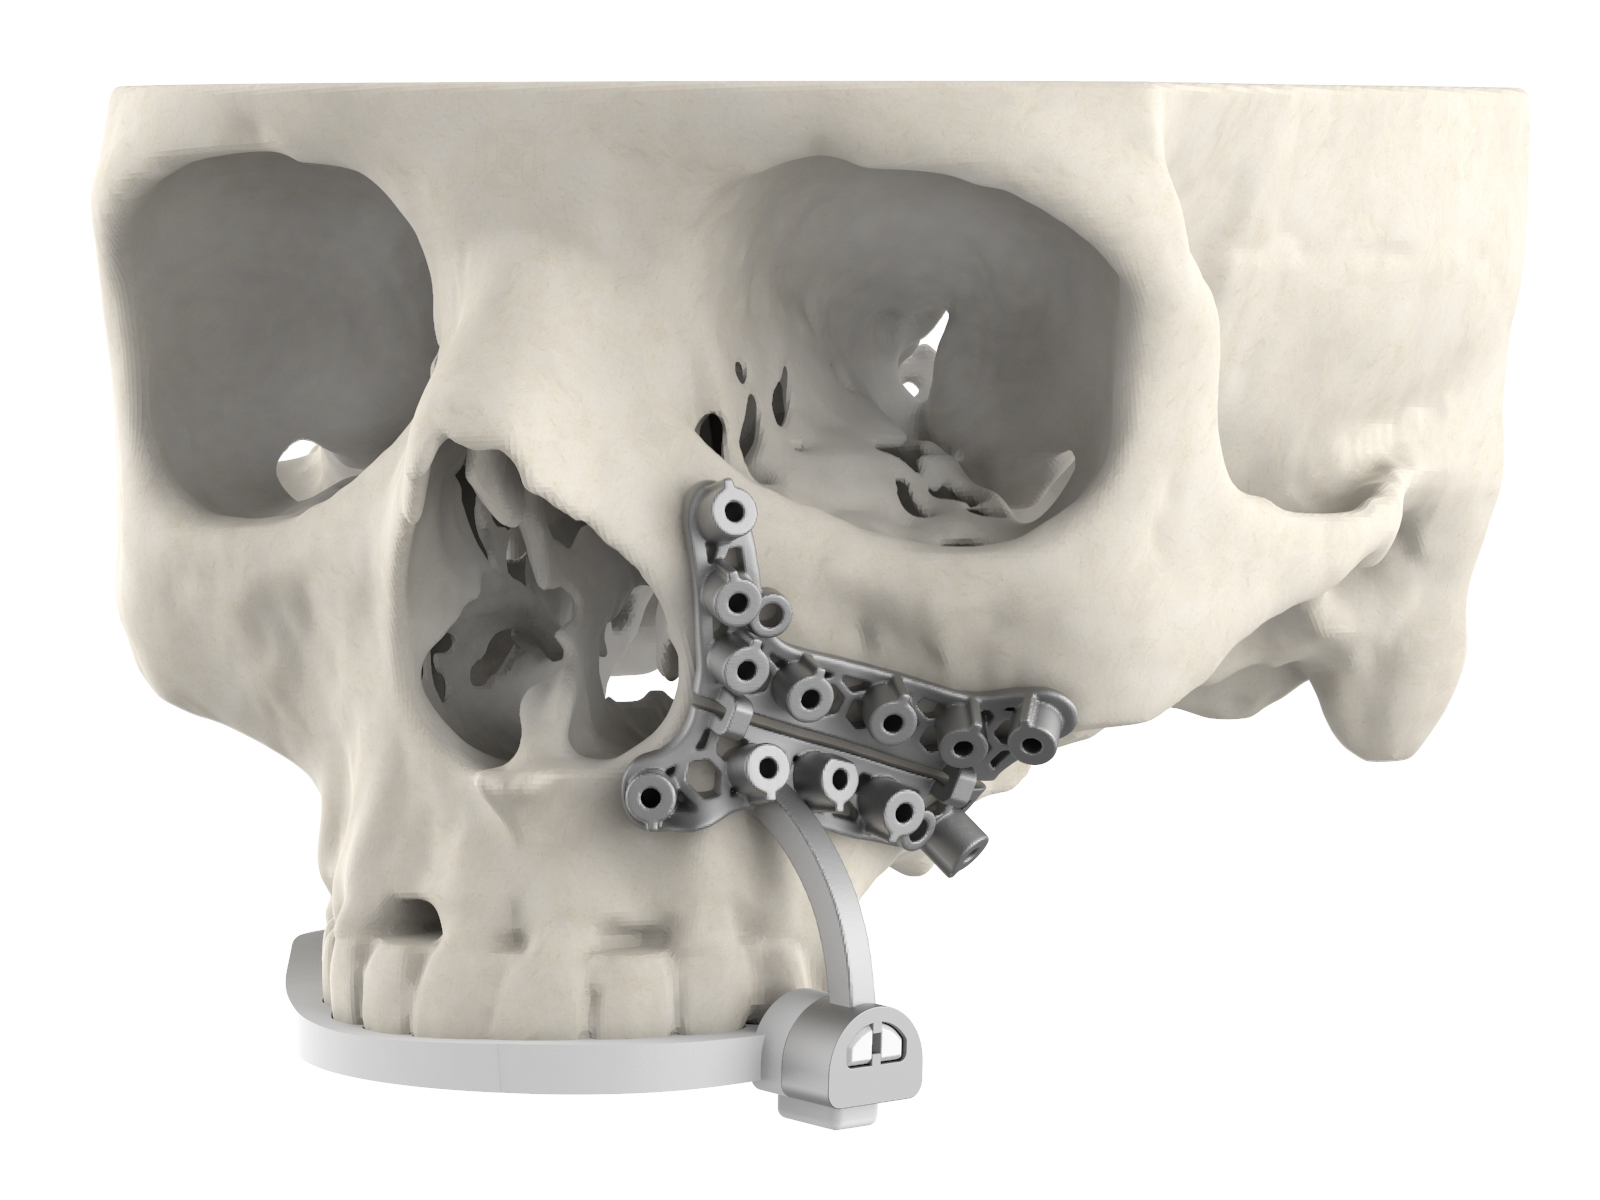 3D Systems and Enhatch partner to scale delivery of 3D printed medical devices